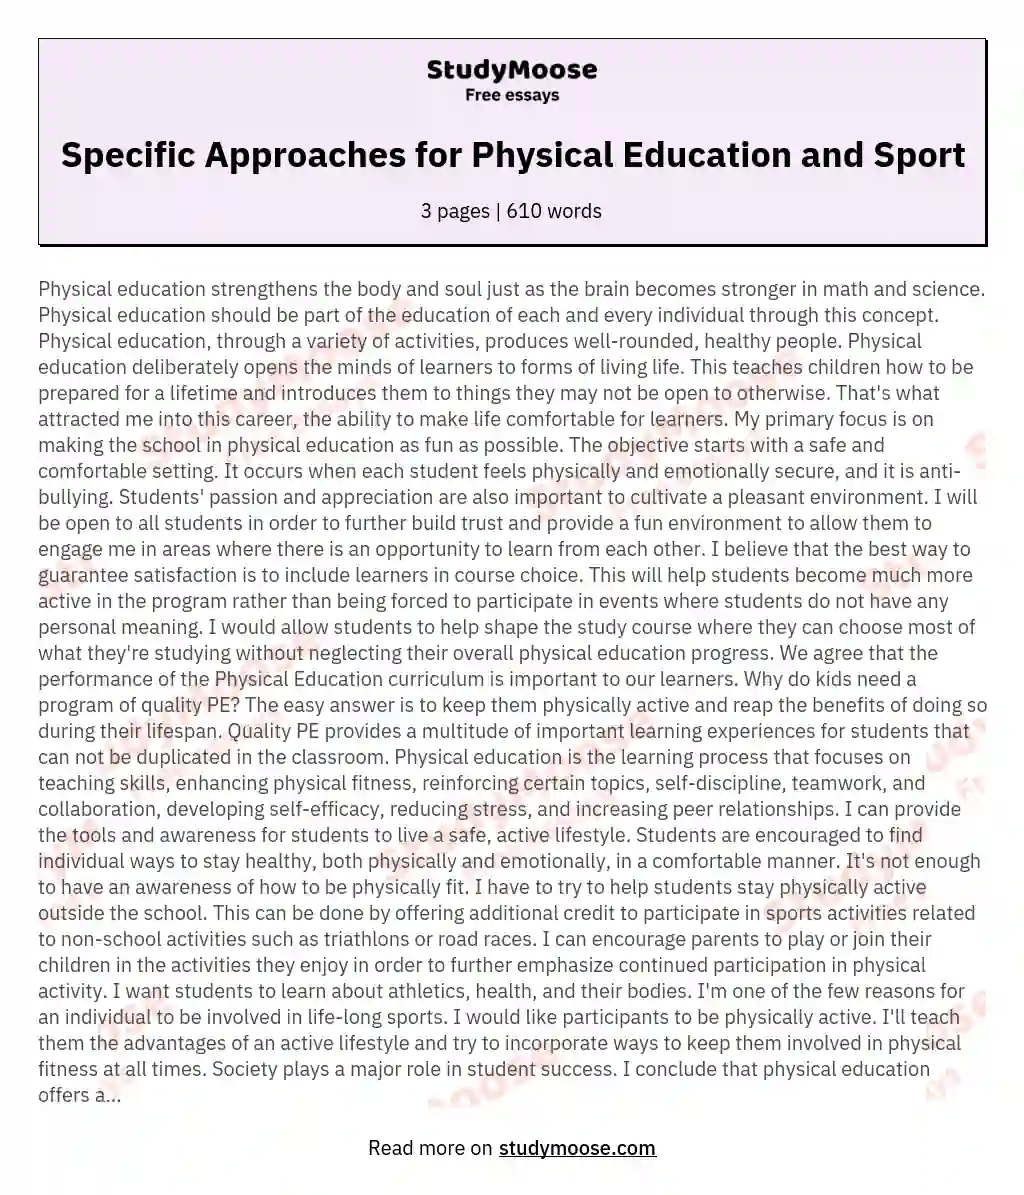 Specific Approaches for Physical Education and Sport essay